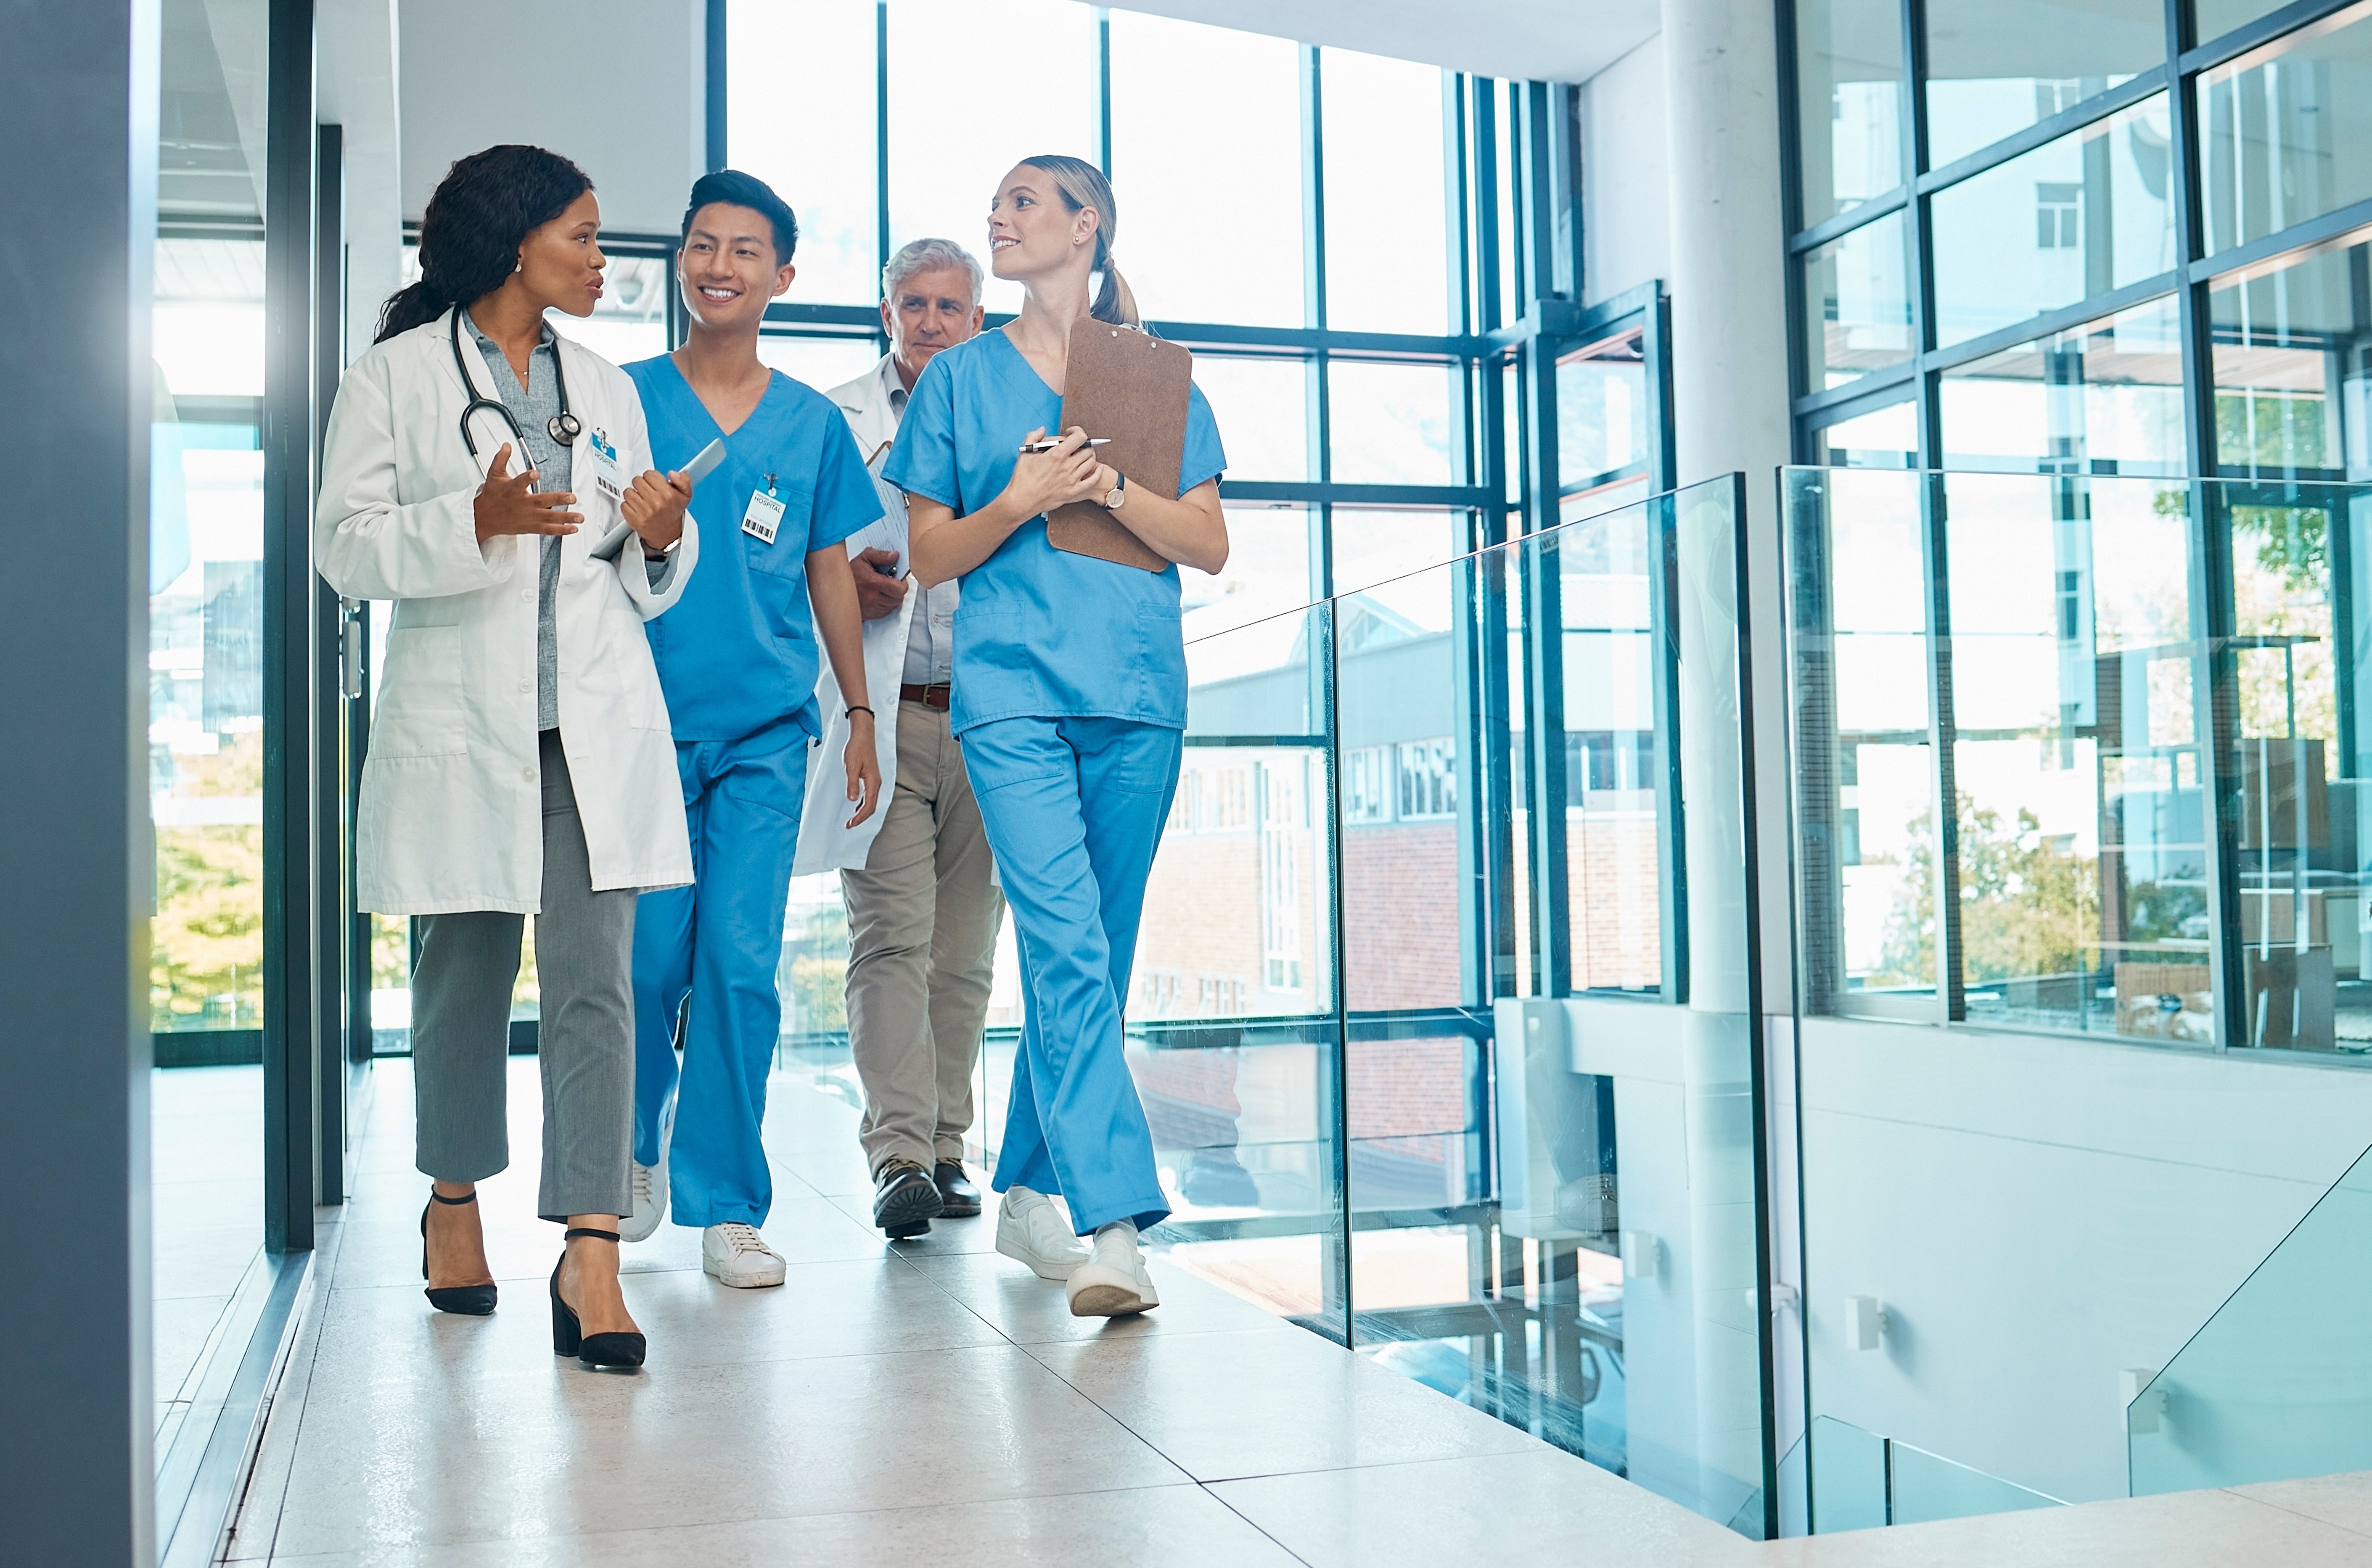 How to Source Better Healthcare Talent without Spending More